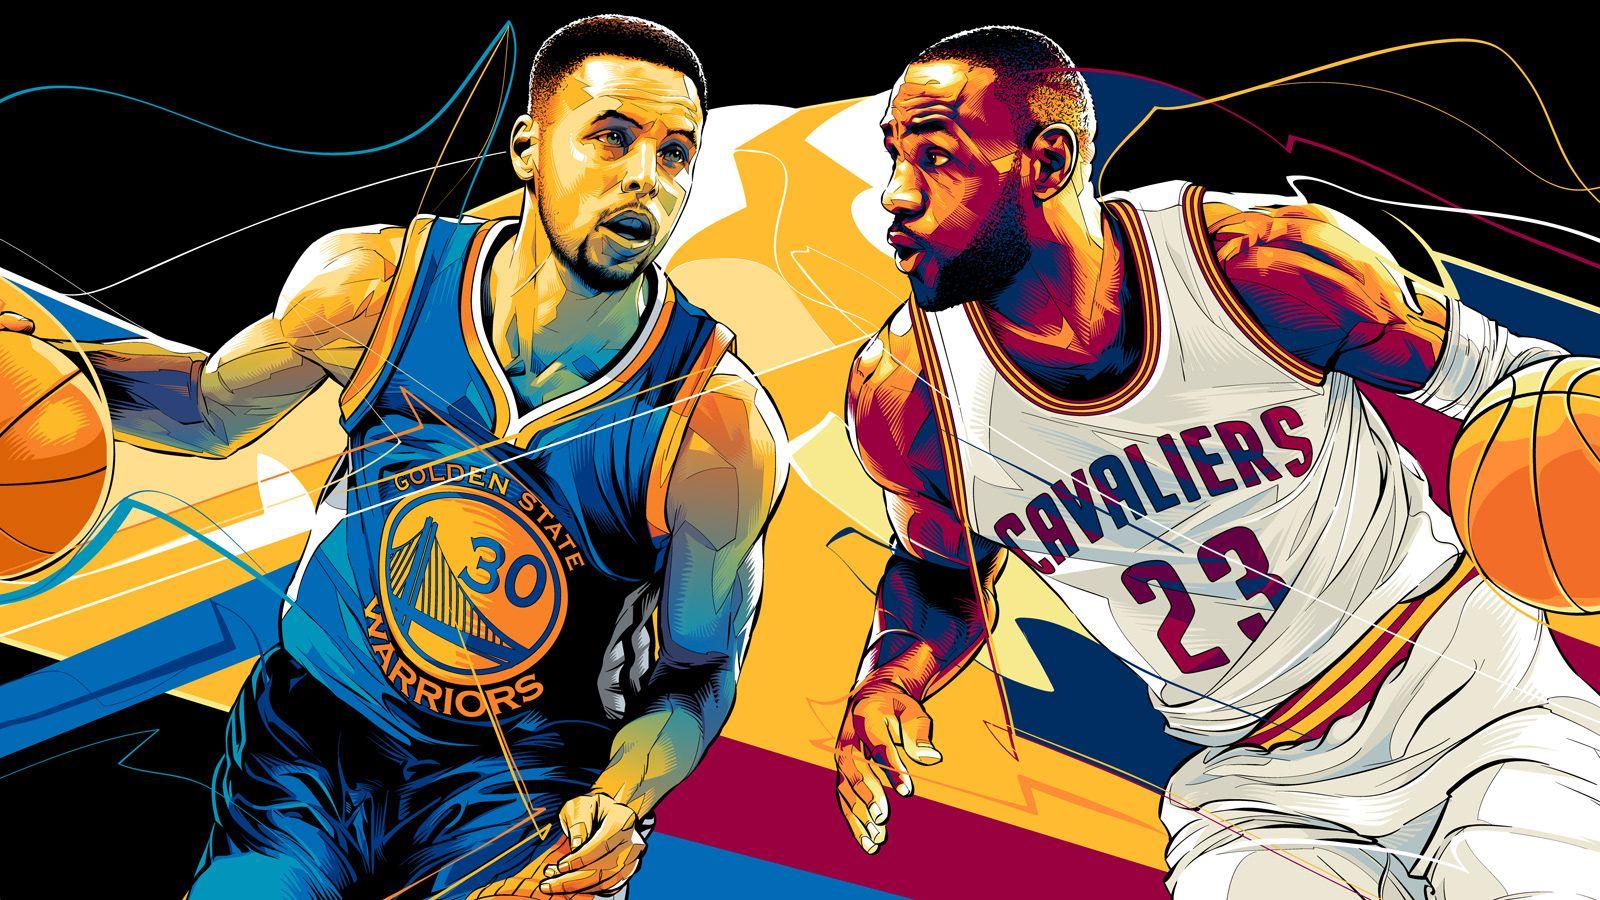 Lebron Vs Curry Wallpapers Wallpaper Cave